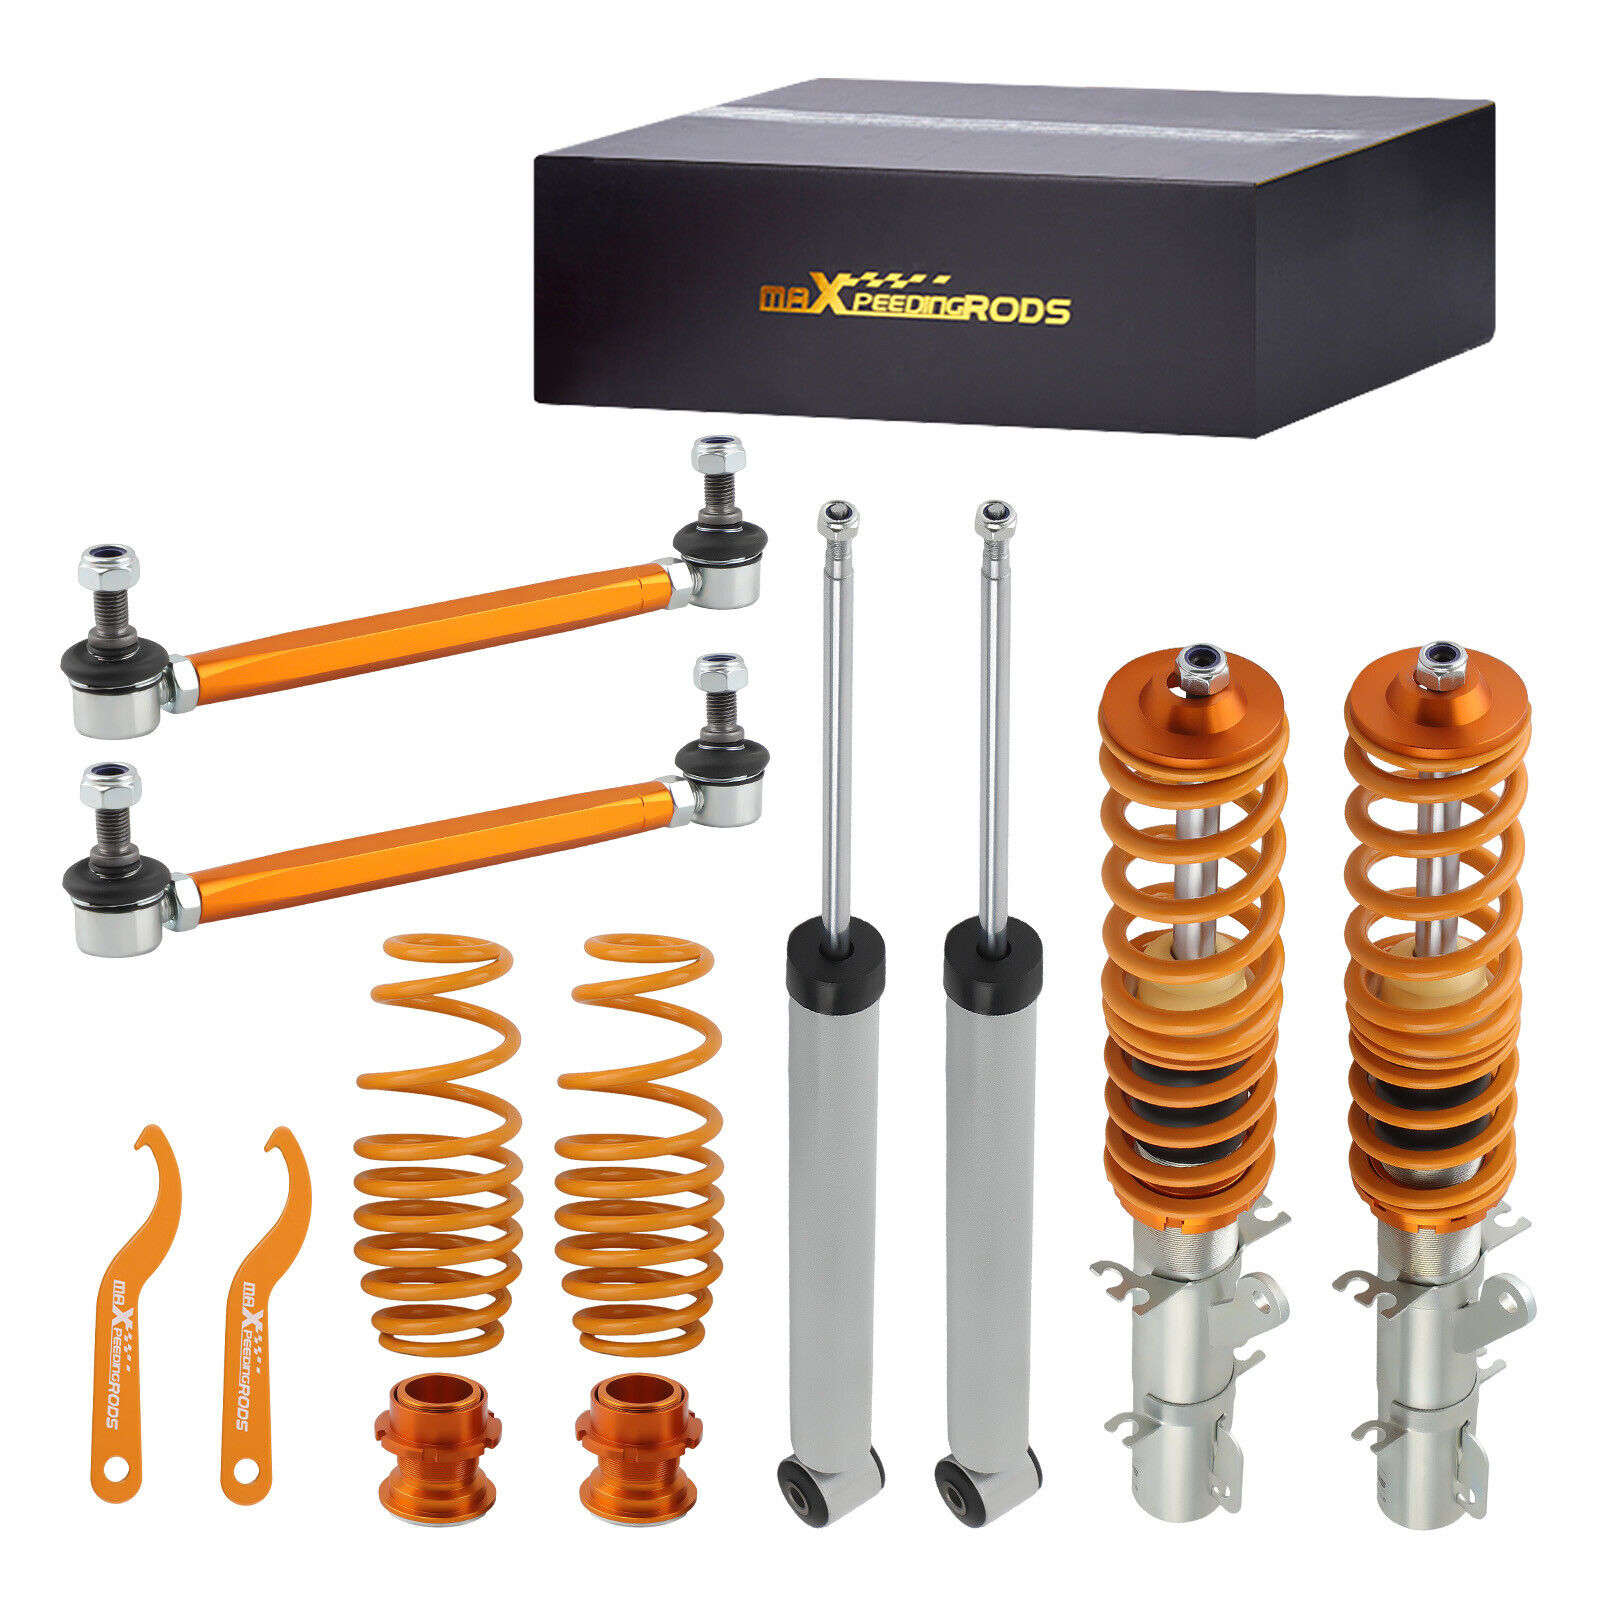 MaXpeedingrods Coilovers Suspension Kit for Audi TT 8N FWD 98-06 A3 8L 96-06 FWD